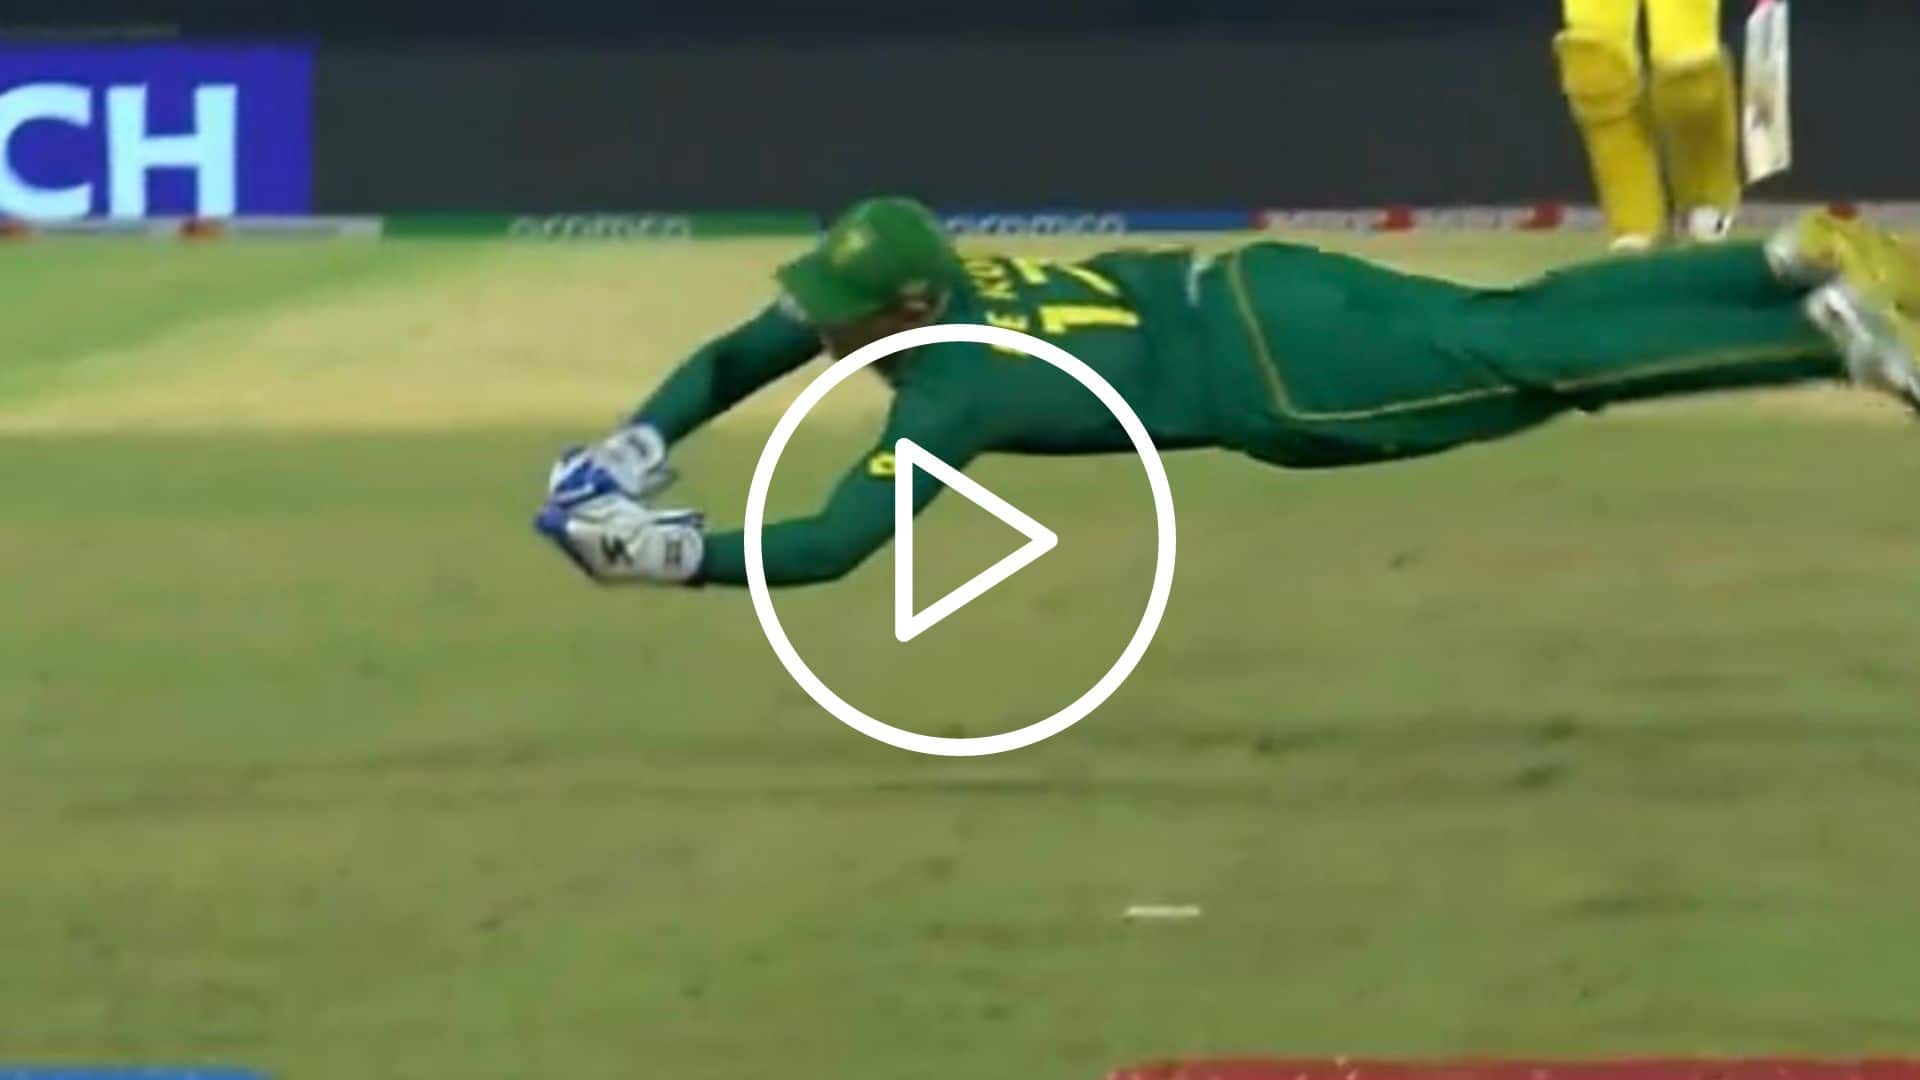 [Watch] Quinton de Kock Pouches Stunner To Dismiss Stoinis In SA vs AUS ...